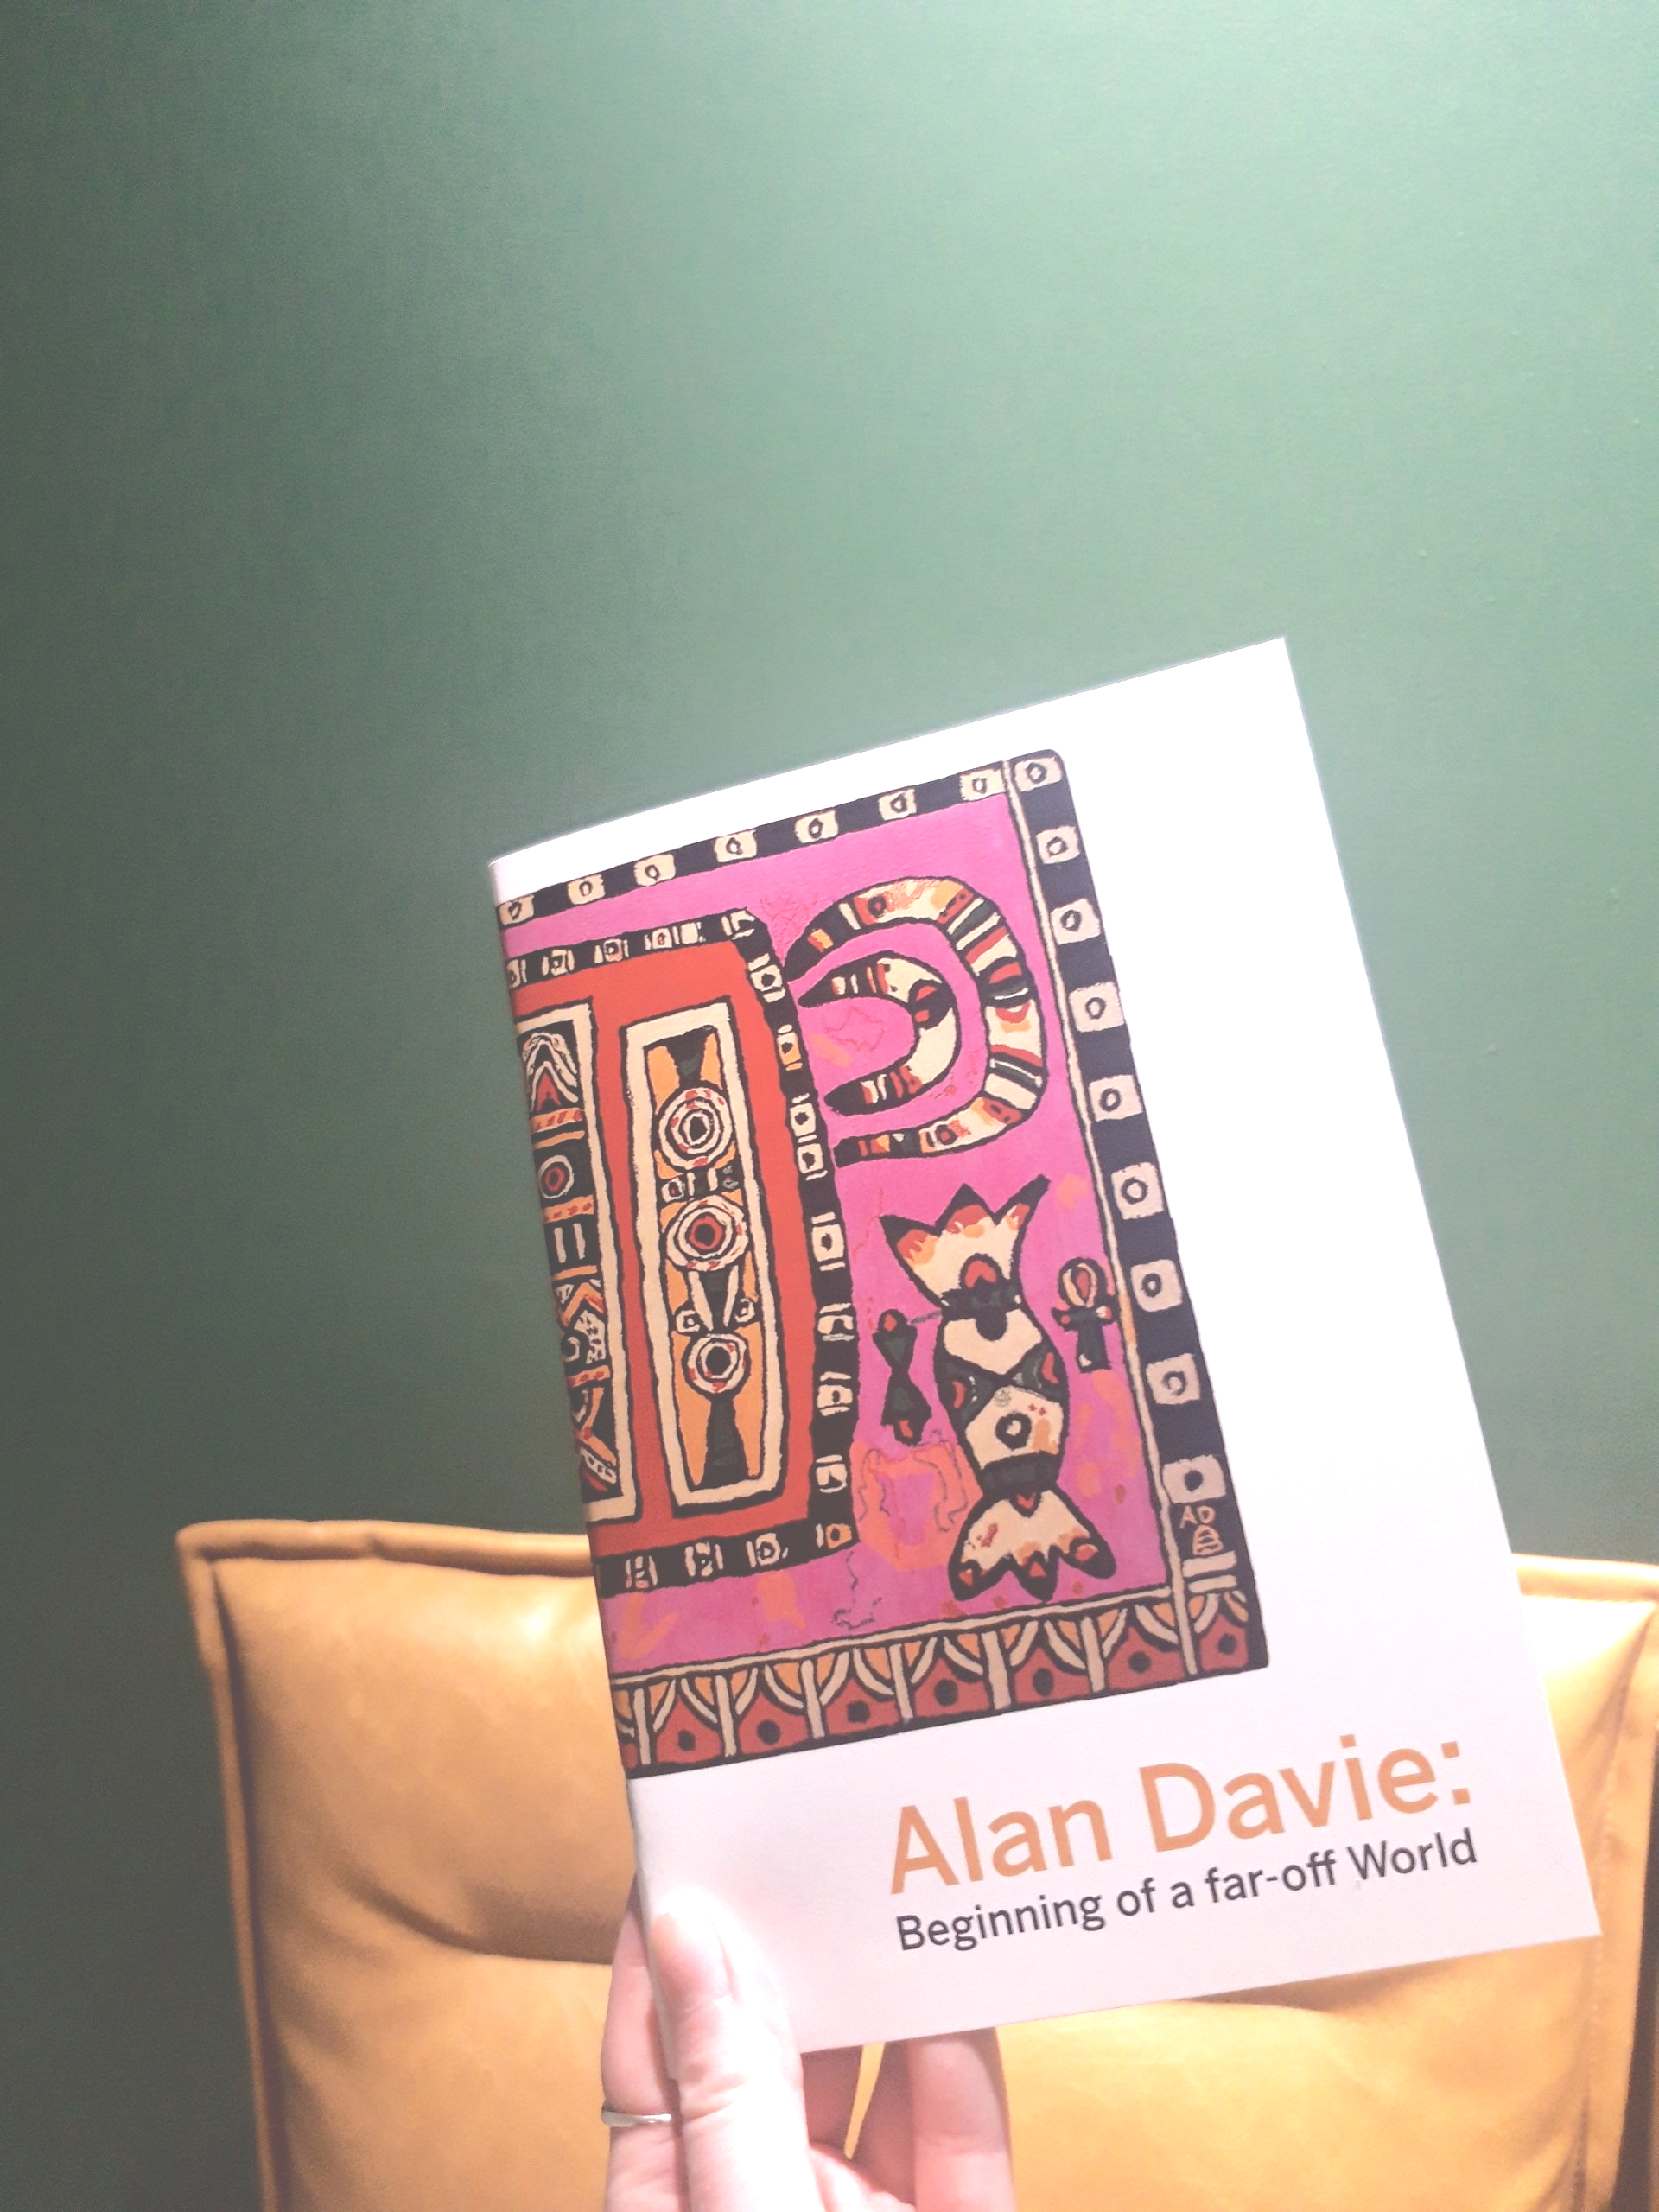 Hand holding book with pink photograph and text 'Alan Davie' in front of green BBC wall